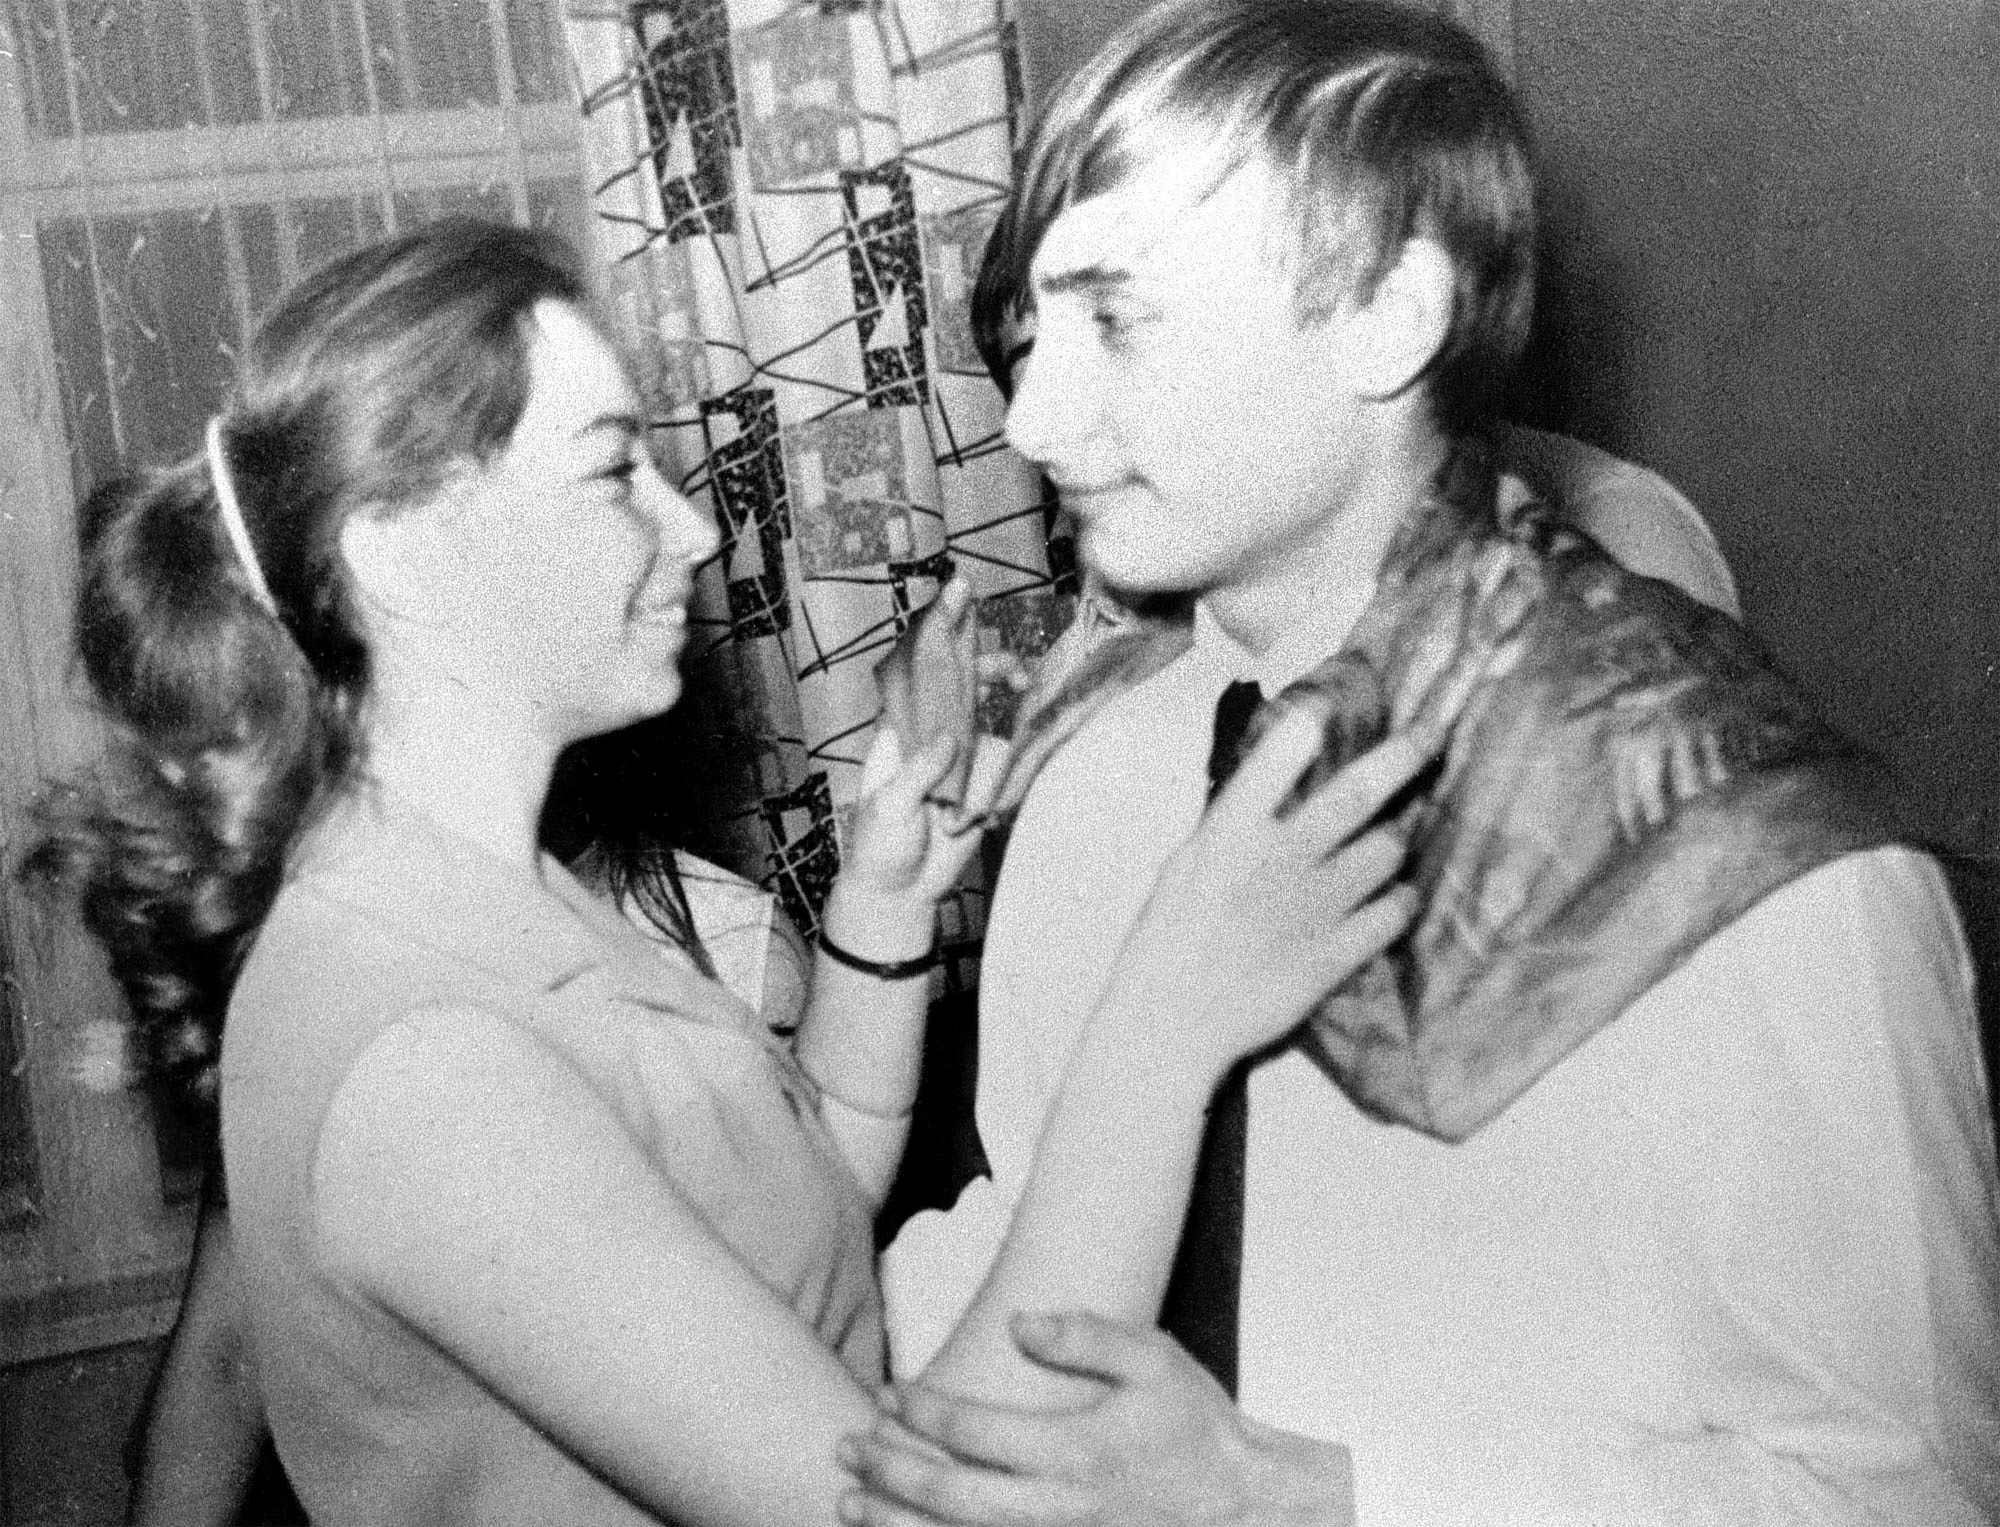 Putin dances with a classmate during a party in St. Petersburg in 1970.